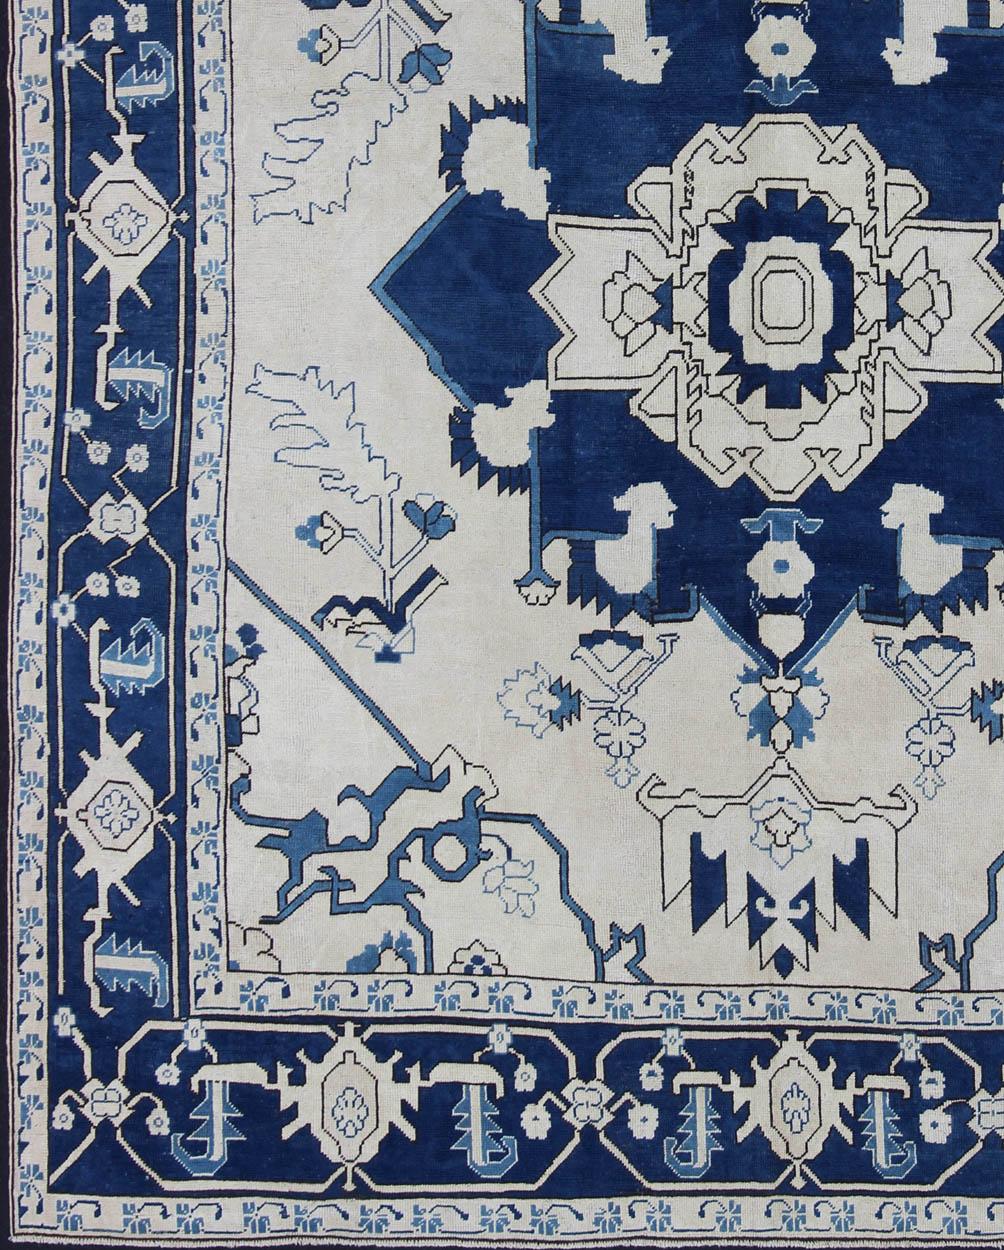 Vintage Oushak with Botanical Medallion design in blue and ivory, rug en-165935, country of origin / type: Turkey / Oushak, circa 1940

This vintage Oushak carpet from mid-20th century Turkey features a traditional medallion design rendered in